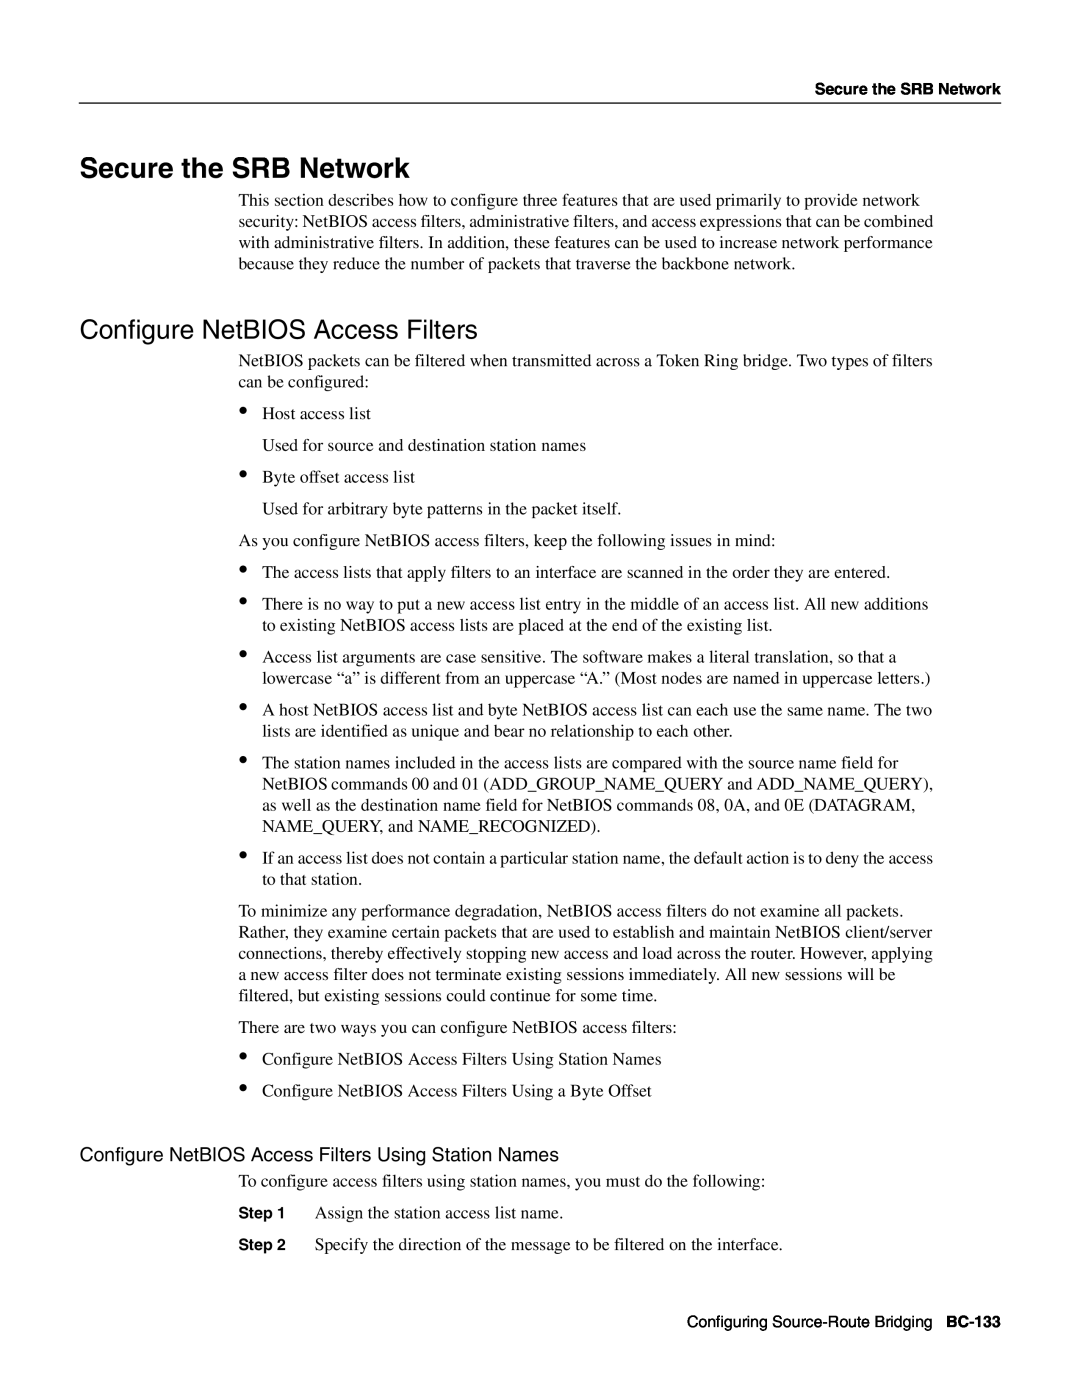 Cisco Systems BC-109 manual Secure the SRB Network, Configure NetBIOS Access Filters 